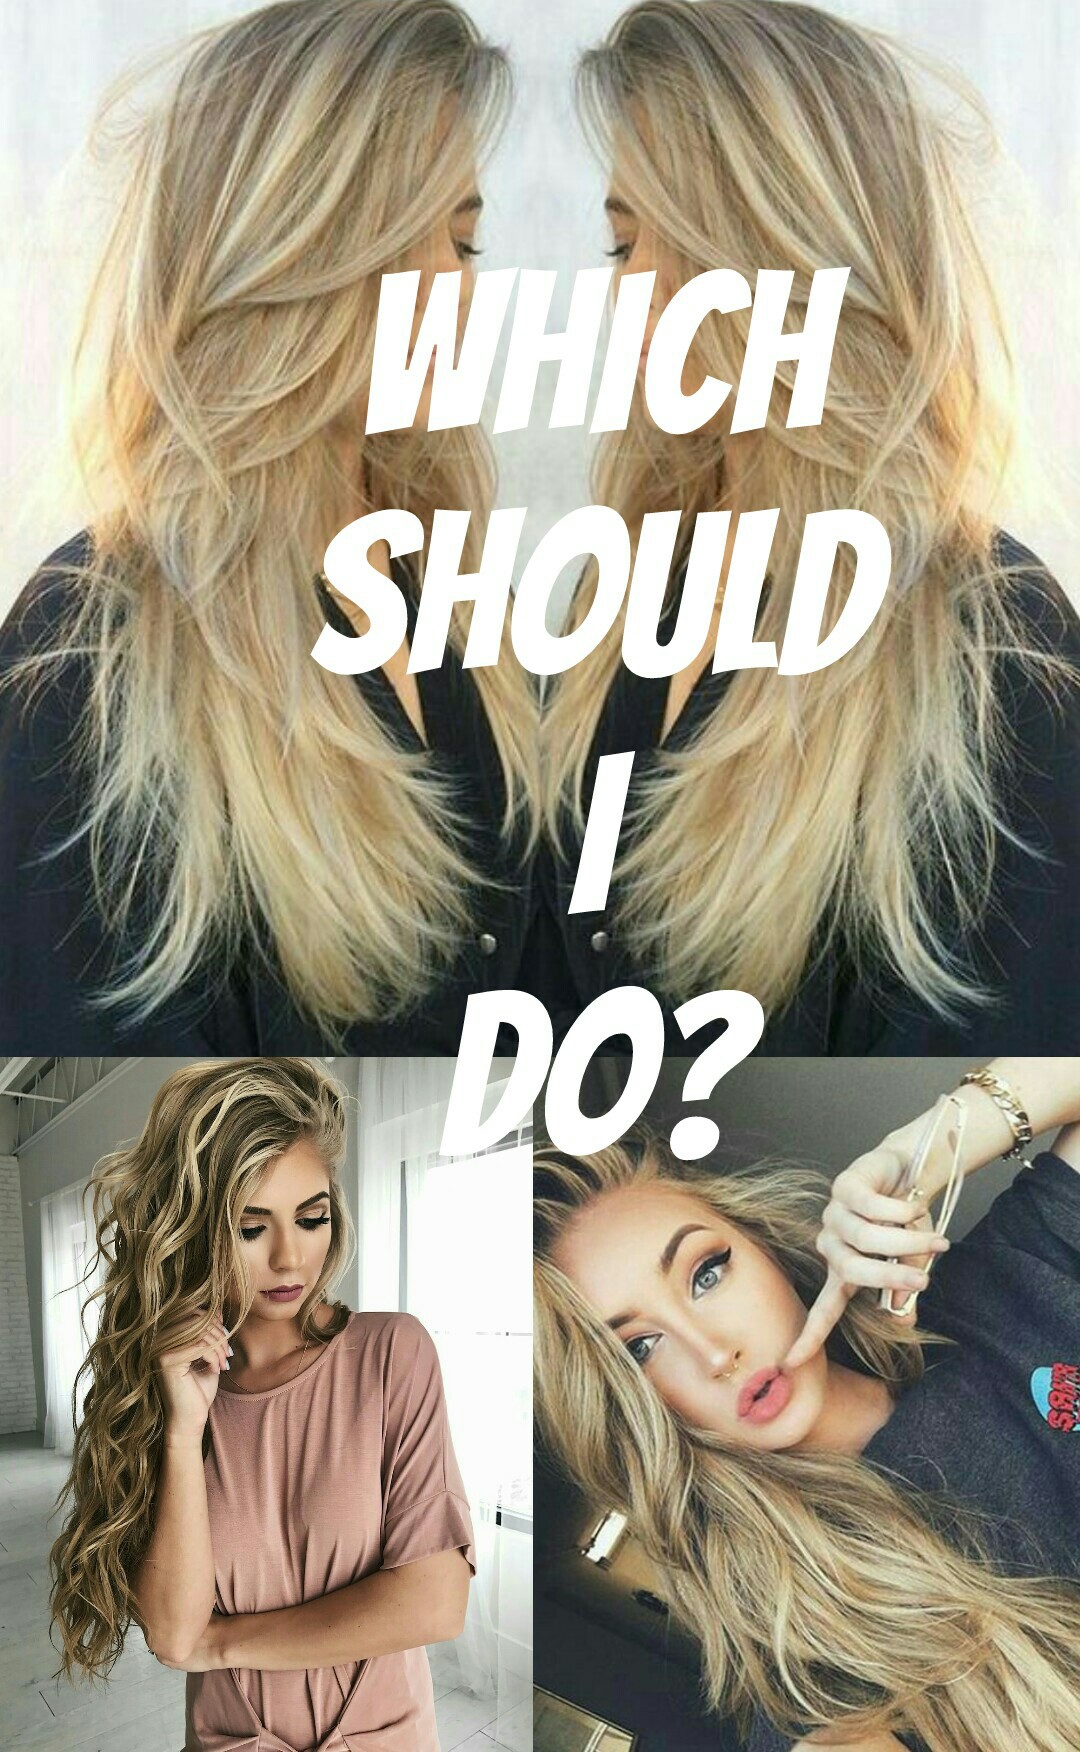 Which Should I Do?